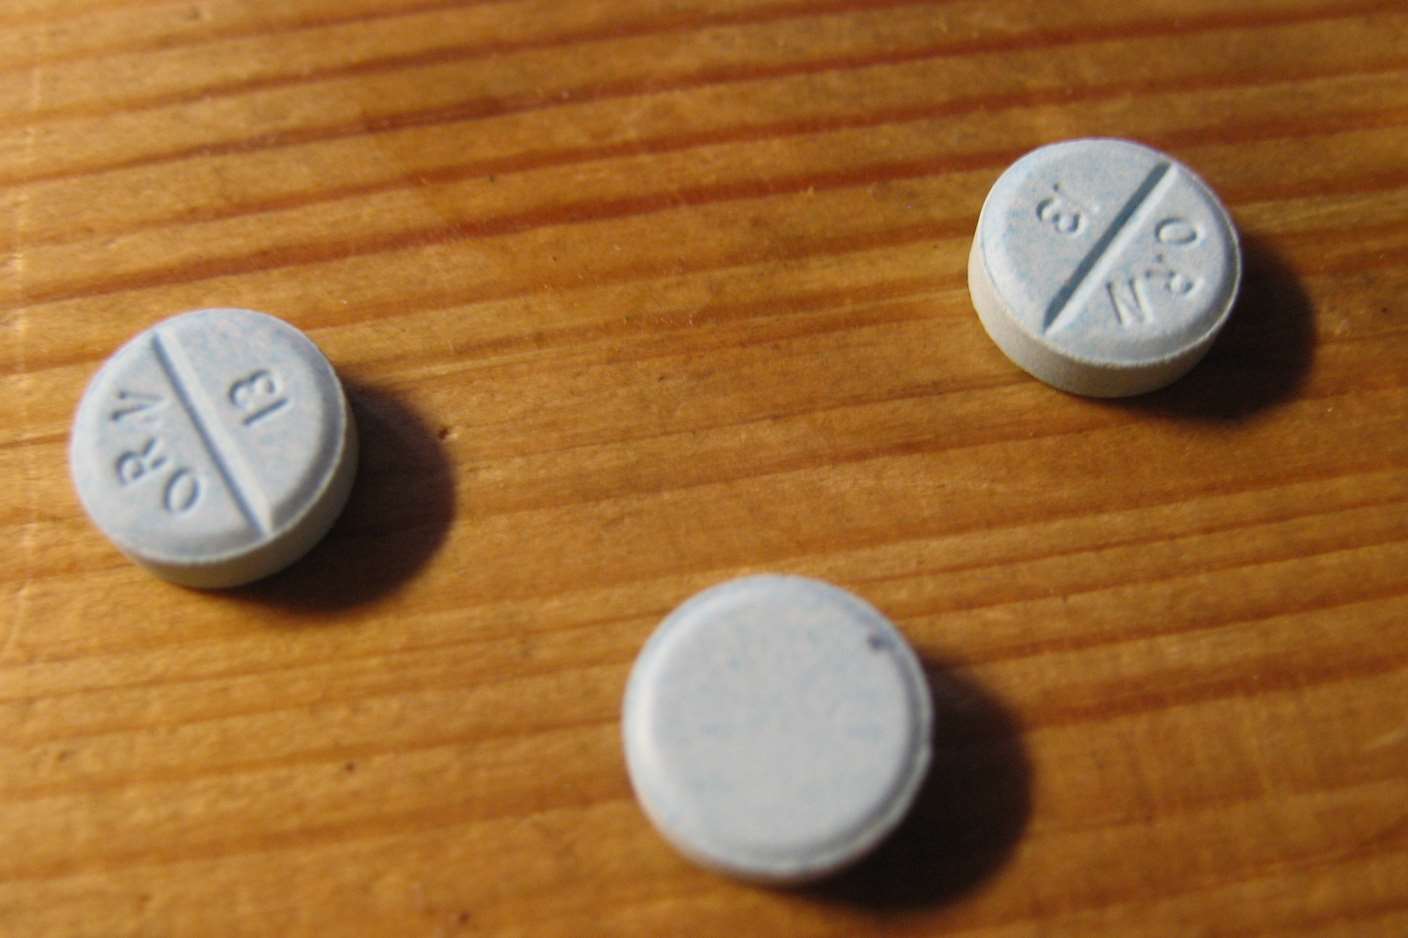 Trainee chemist Carla Miles stole diazepam tablets from her pharmacy. Picture: ZngZng/Wikimedia Commons